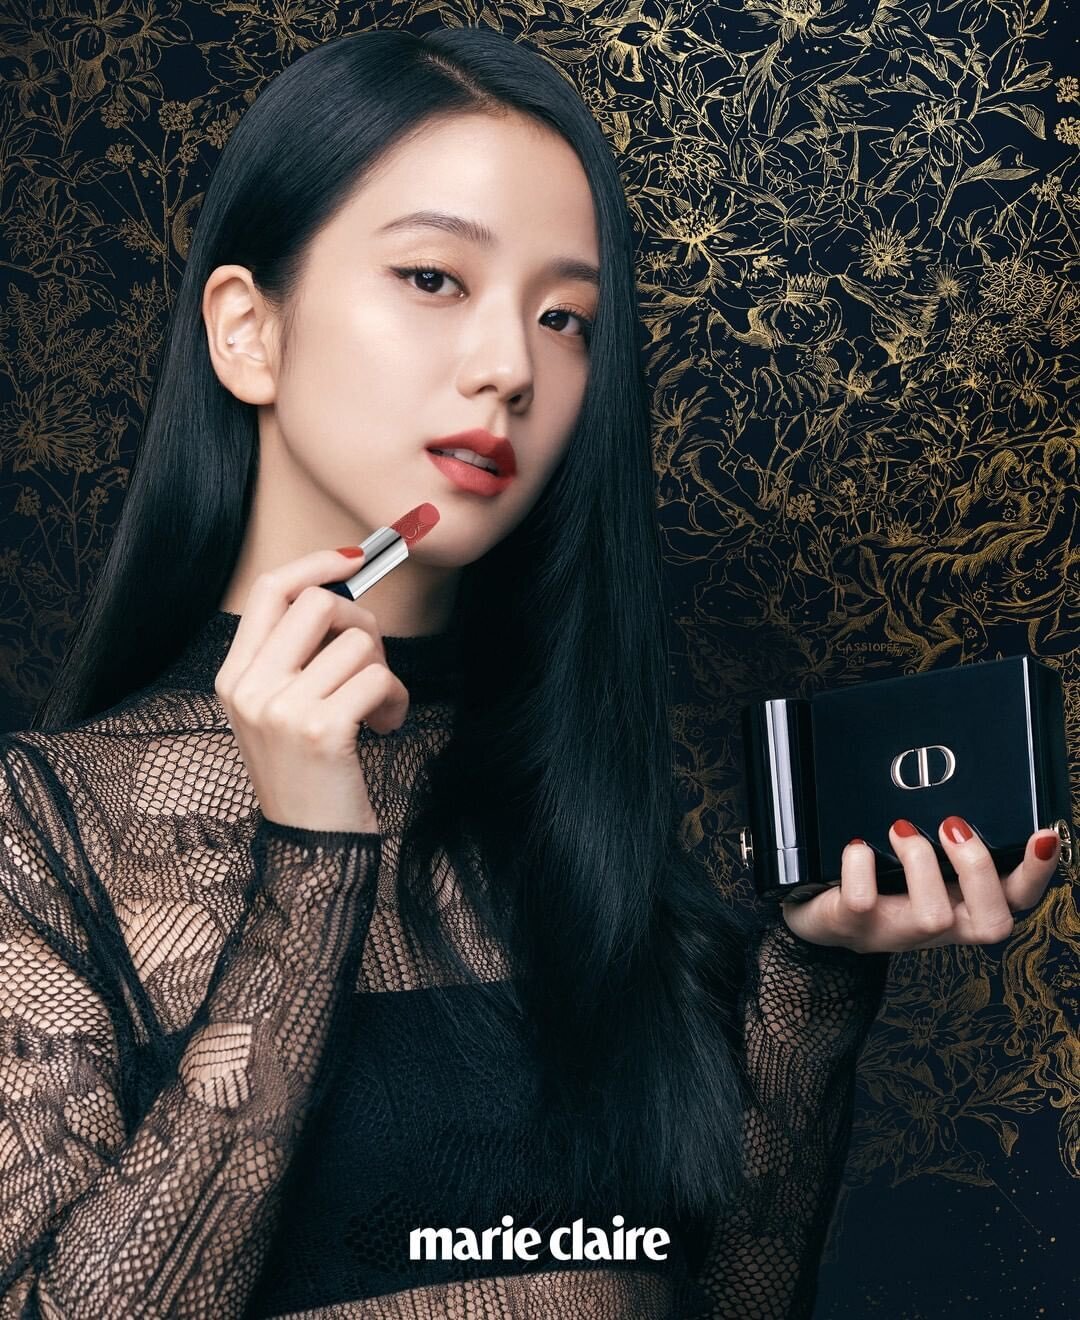 Dior on X: Dior is pleased to announce that JISOO, the BLACKPINK singer,  actress, and Dior global ambassador for fashion and beauty, will personally  attend the #DiorSS22 show from Maria Grazia Chiuri